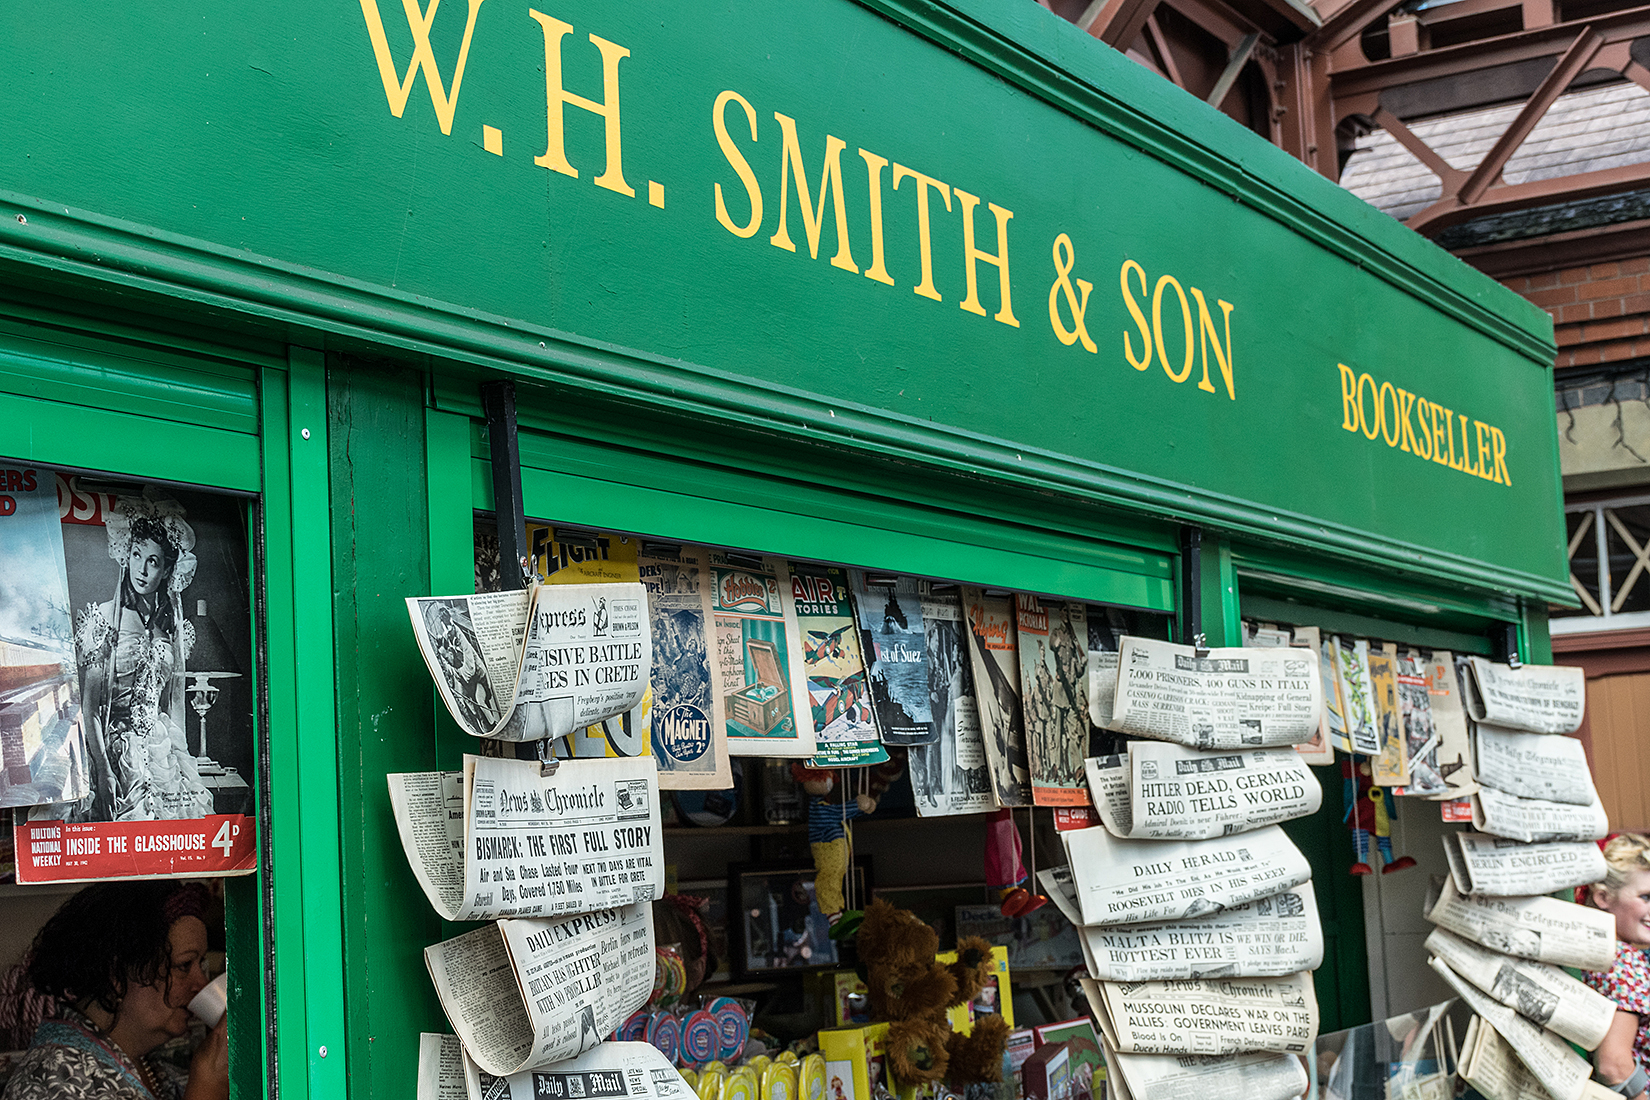 WH Smith & Son the bookseller